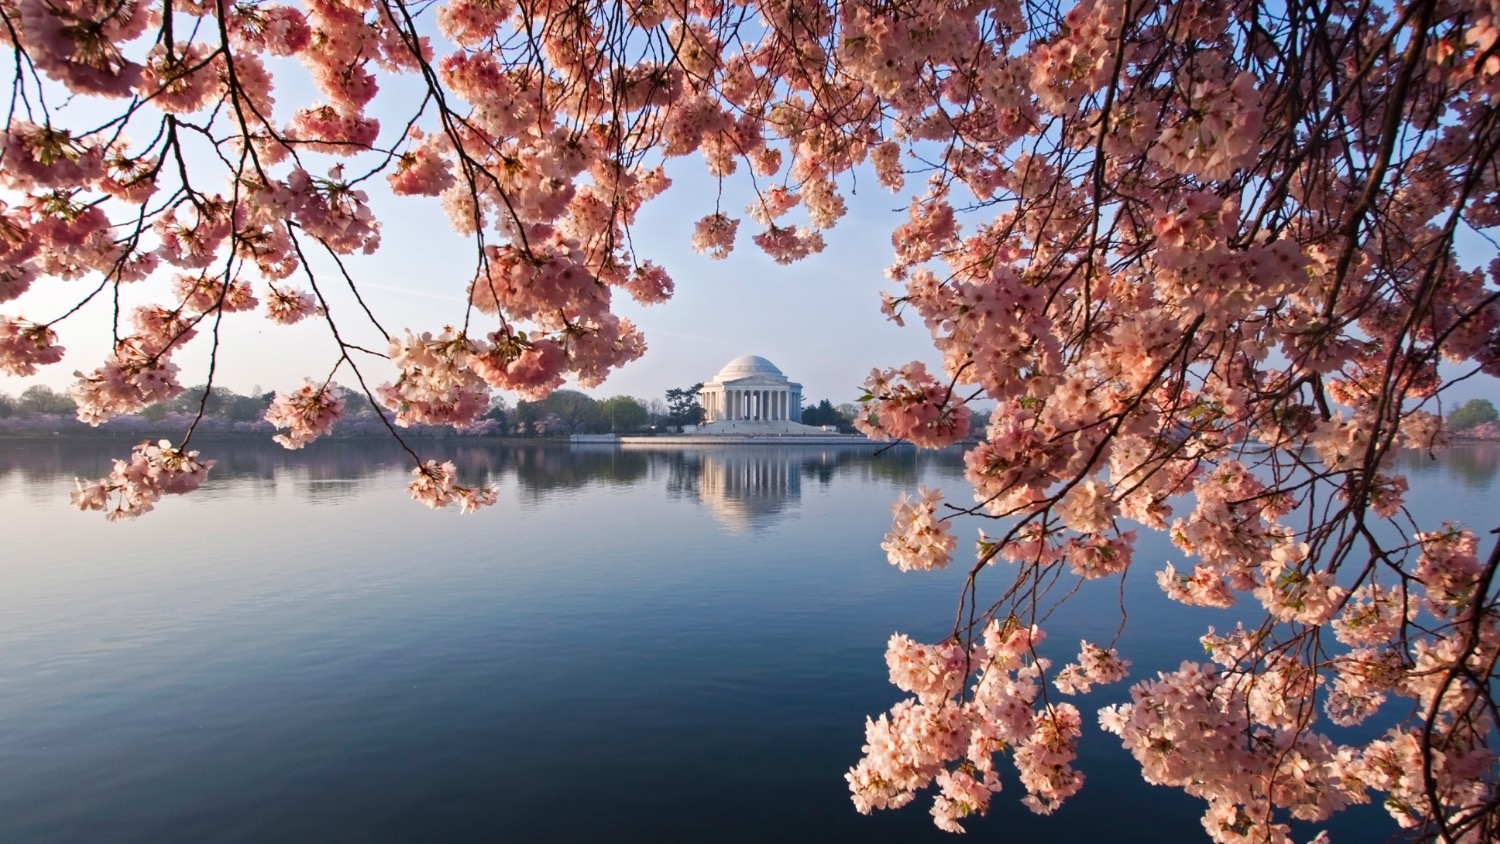 The Jefferson monument in Washington, D.C. framed by a spectacular cherry blossom display. Focus on the monument background.